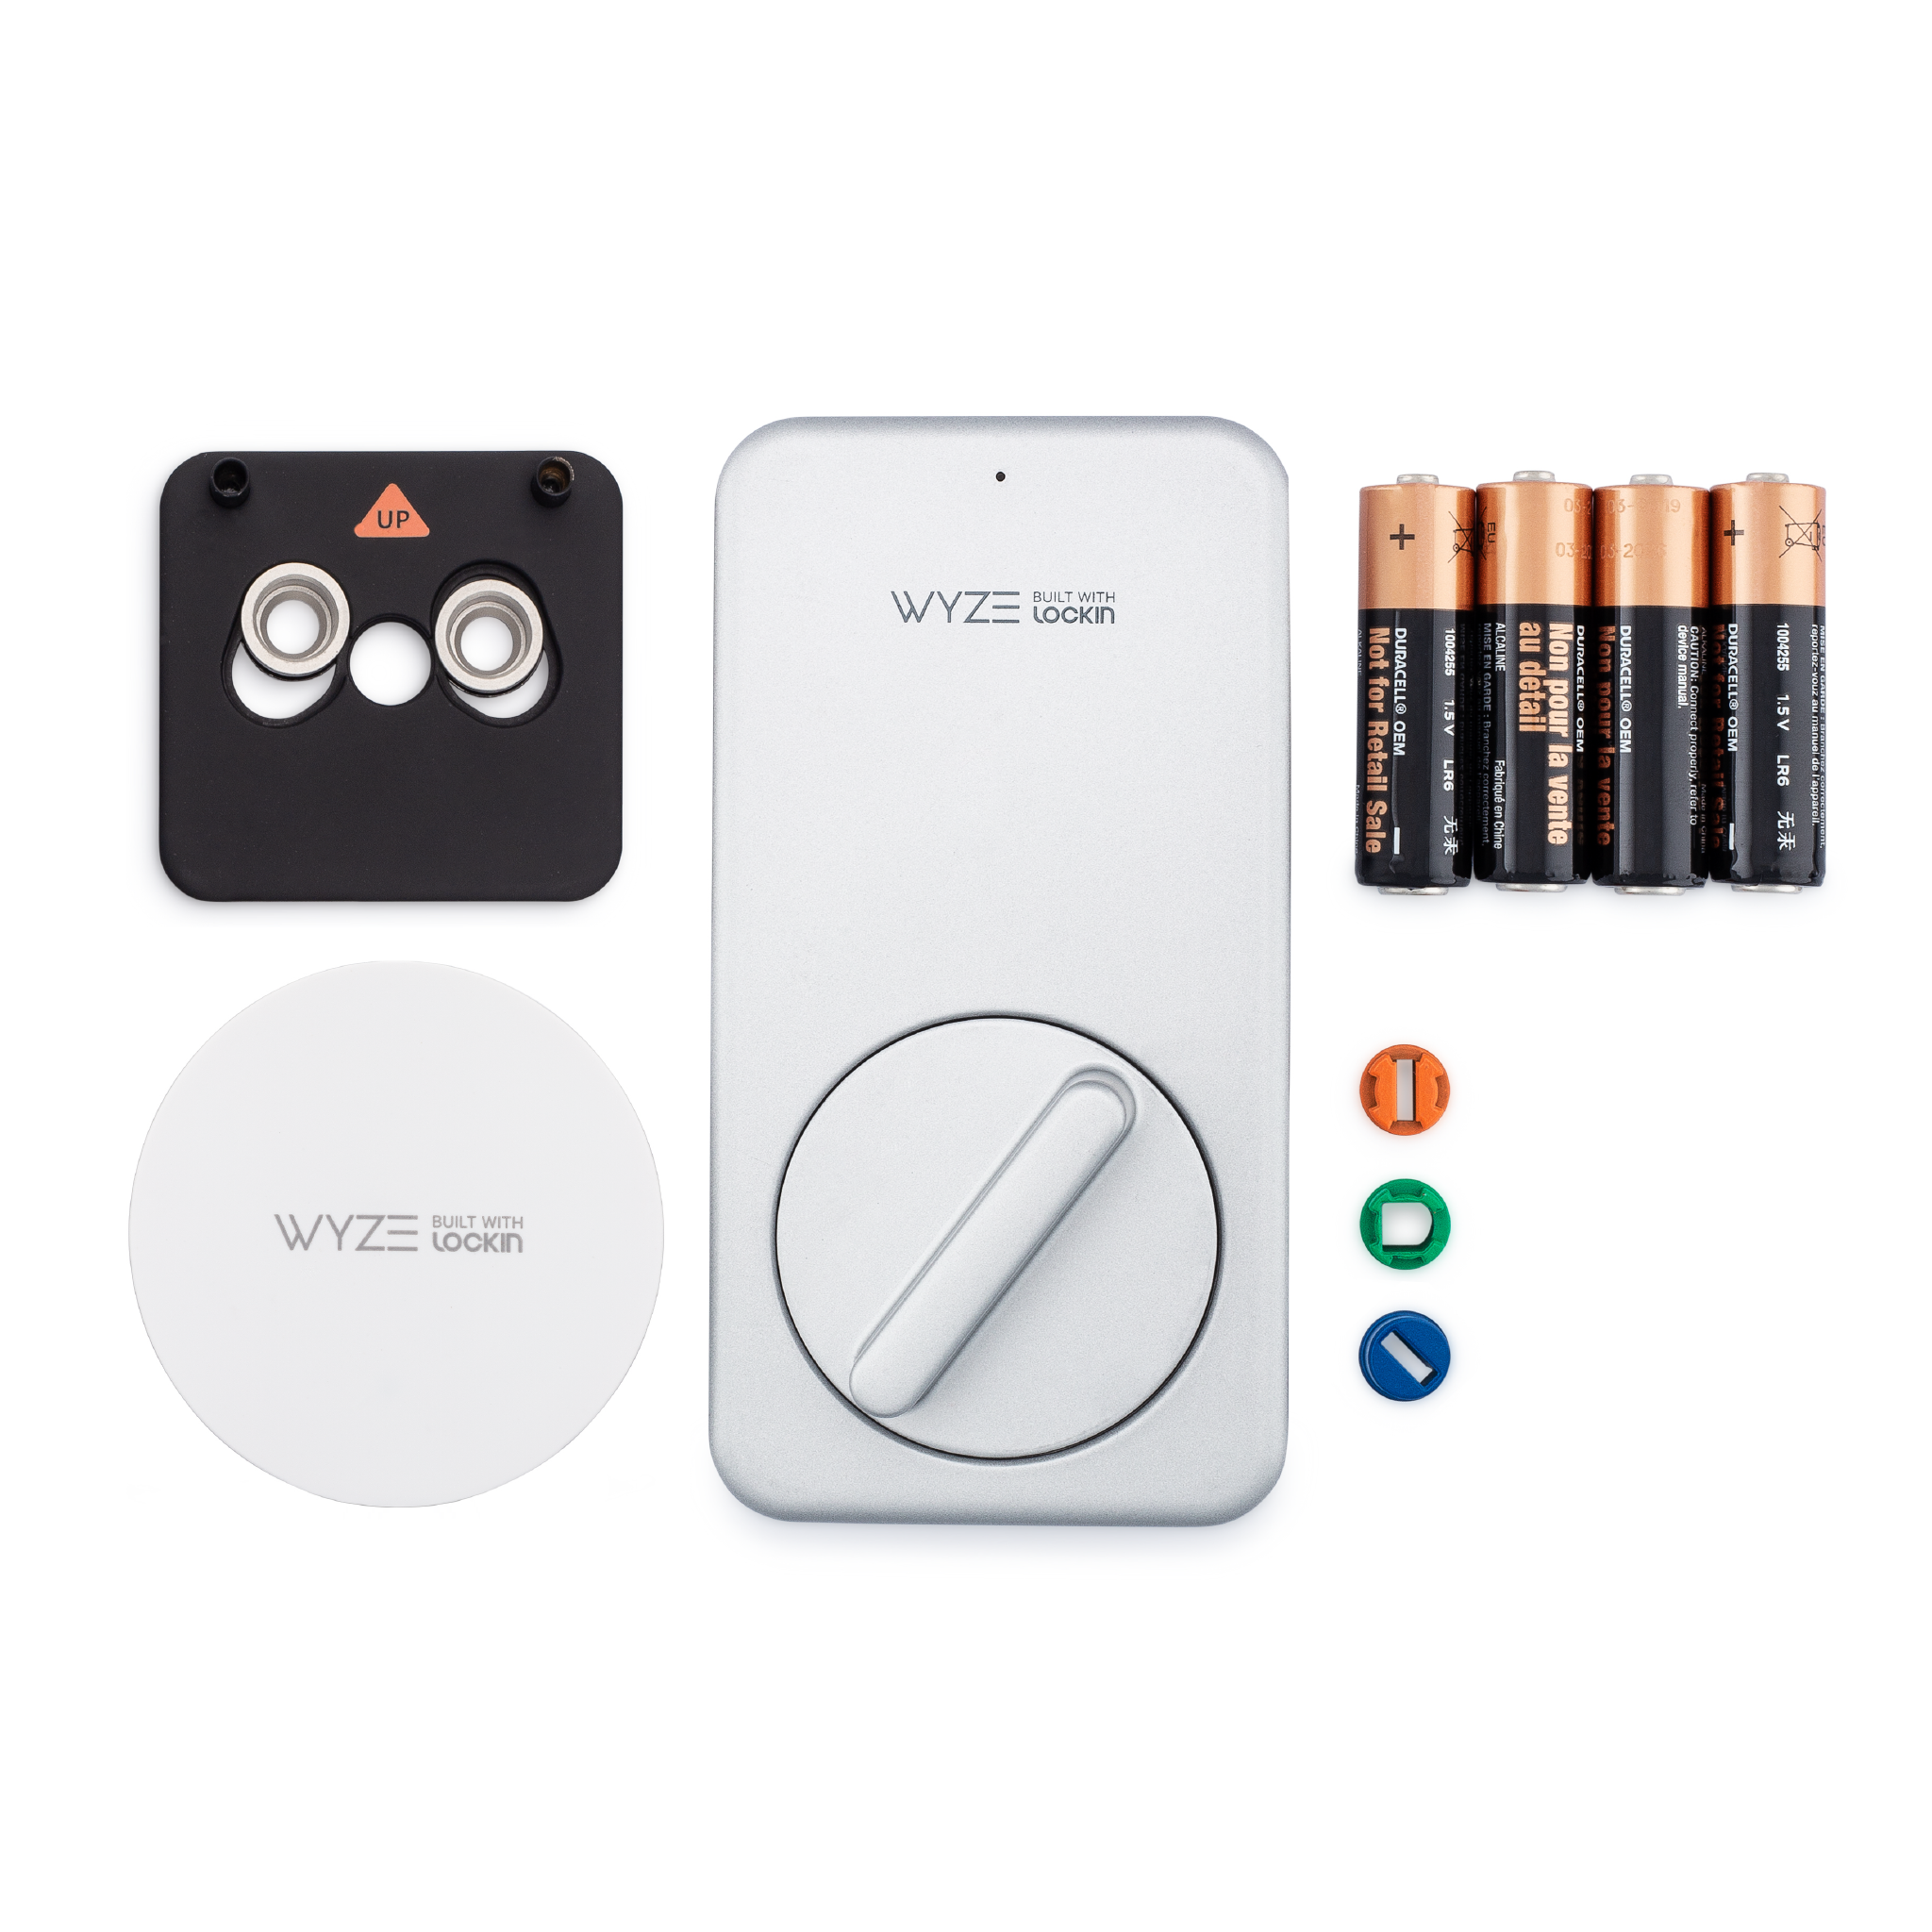 Wyze Lock Keypad for Wyze Lock Share and use Unique Codes to Unlock Your Wyze Lock Wyze Lock Sold Separately A Completely Wireless Bluetooth keypad That Allows You to Create